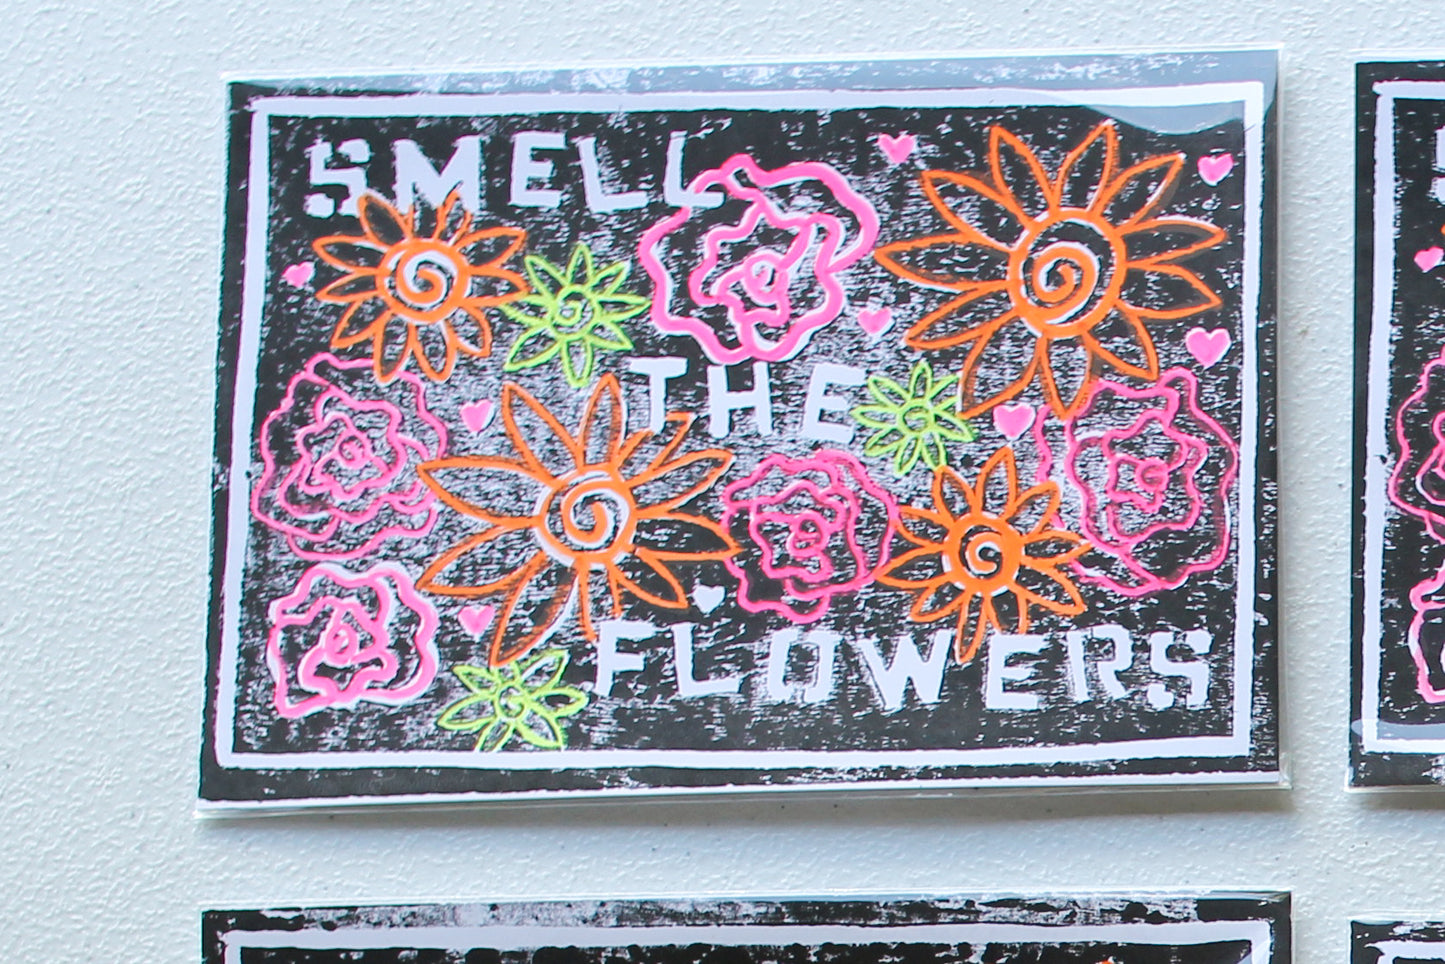 Smell The Flowers print